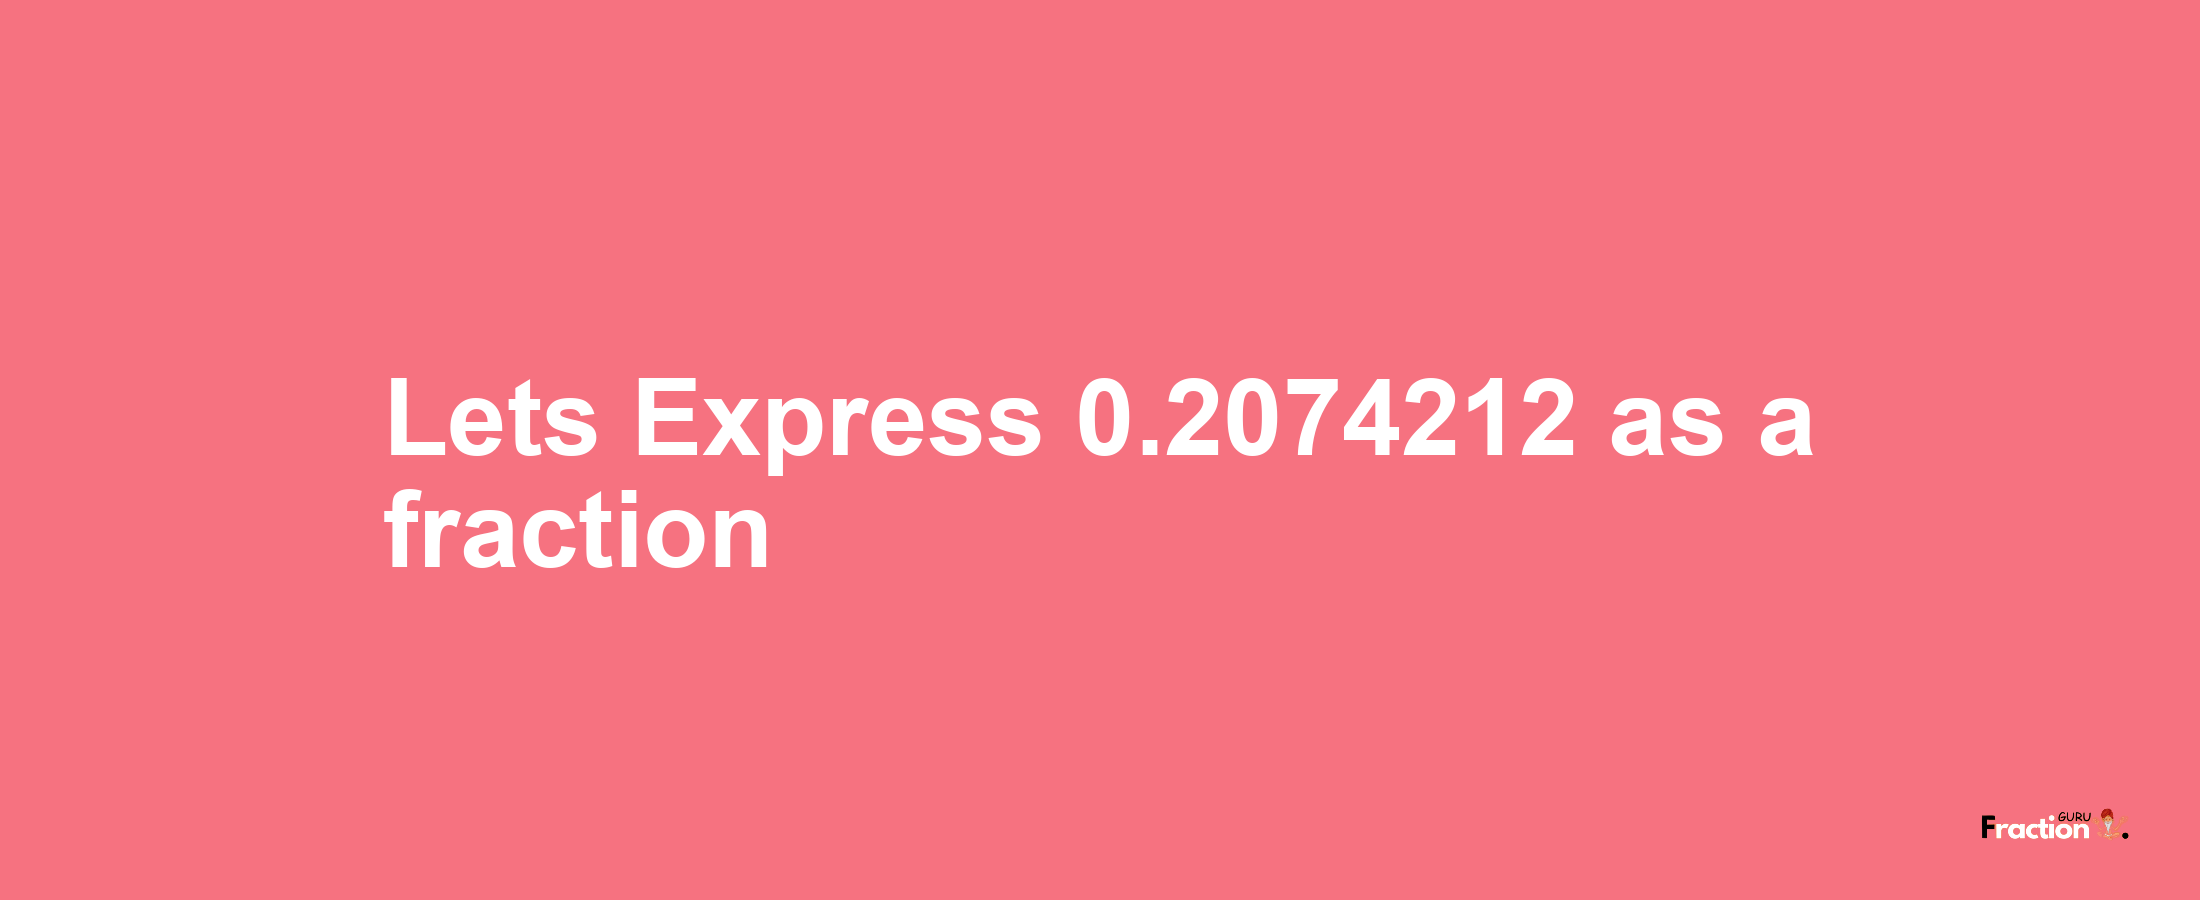 Lets Express 0.2074212 as afraction